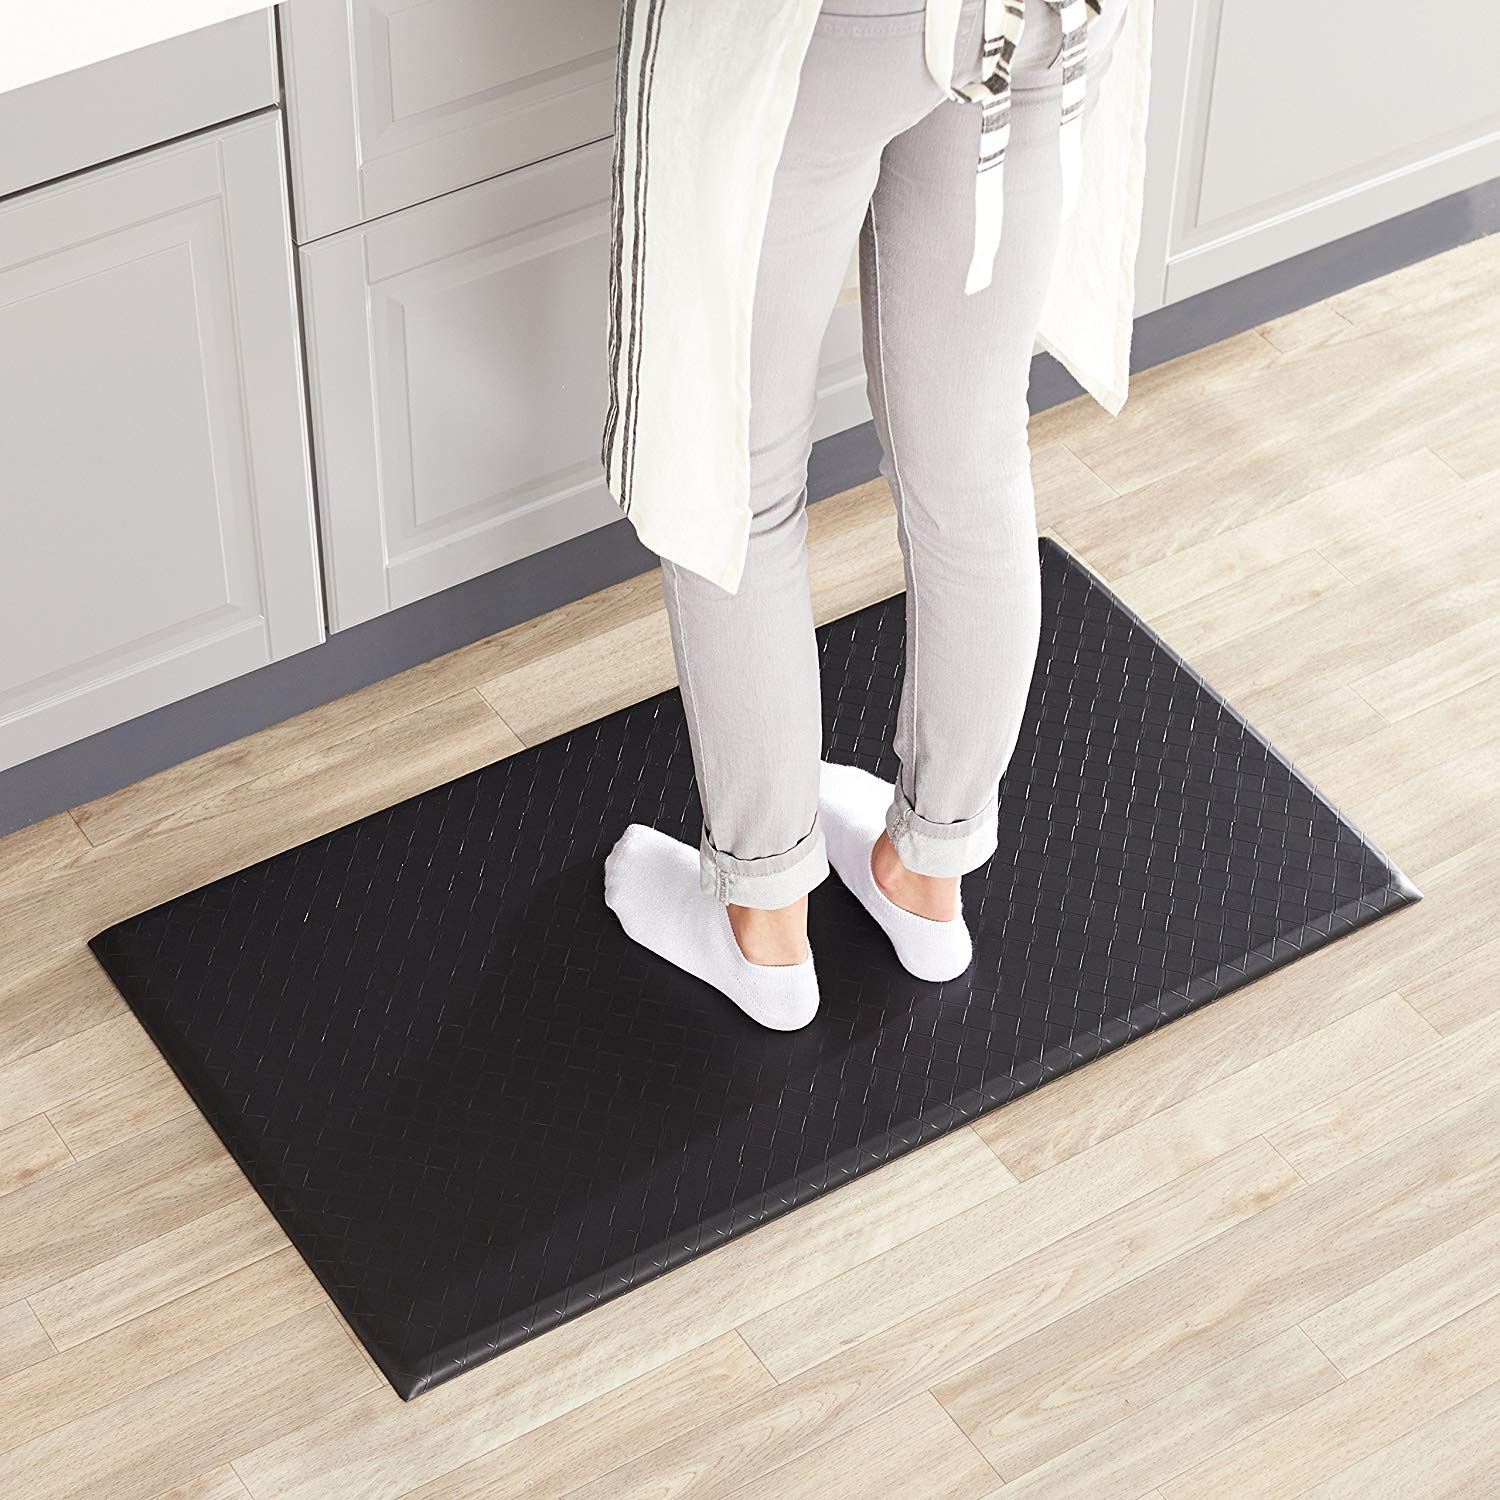 Comfort Anti-Fatigue Mat from Amazon Basics Premium for home and office